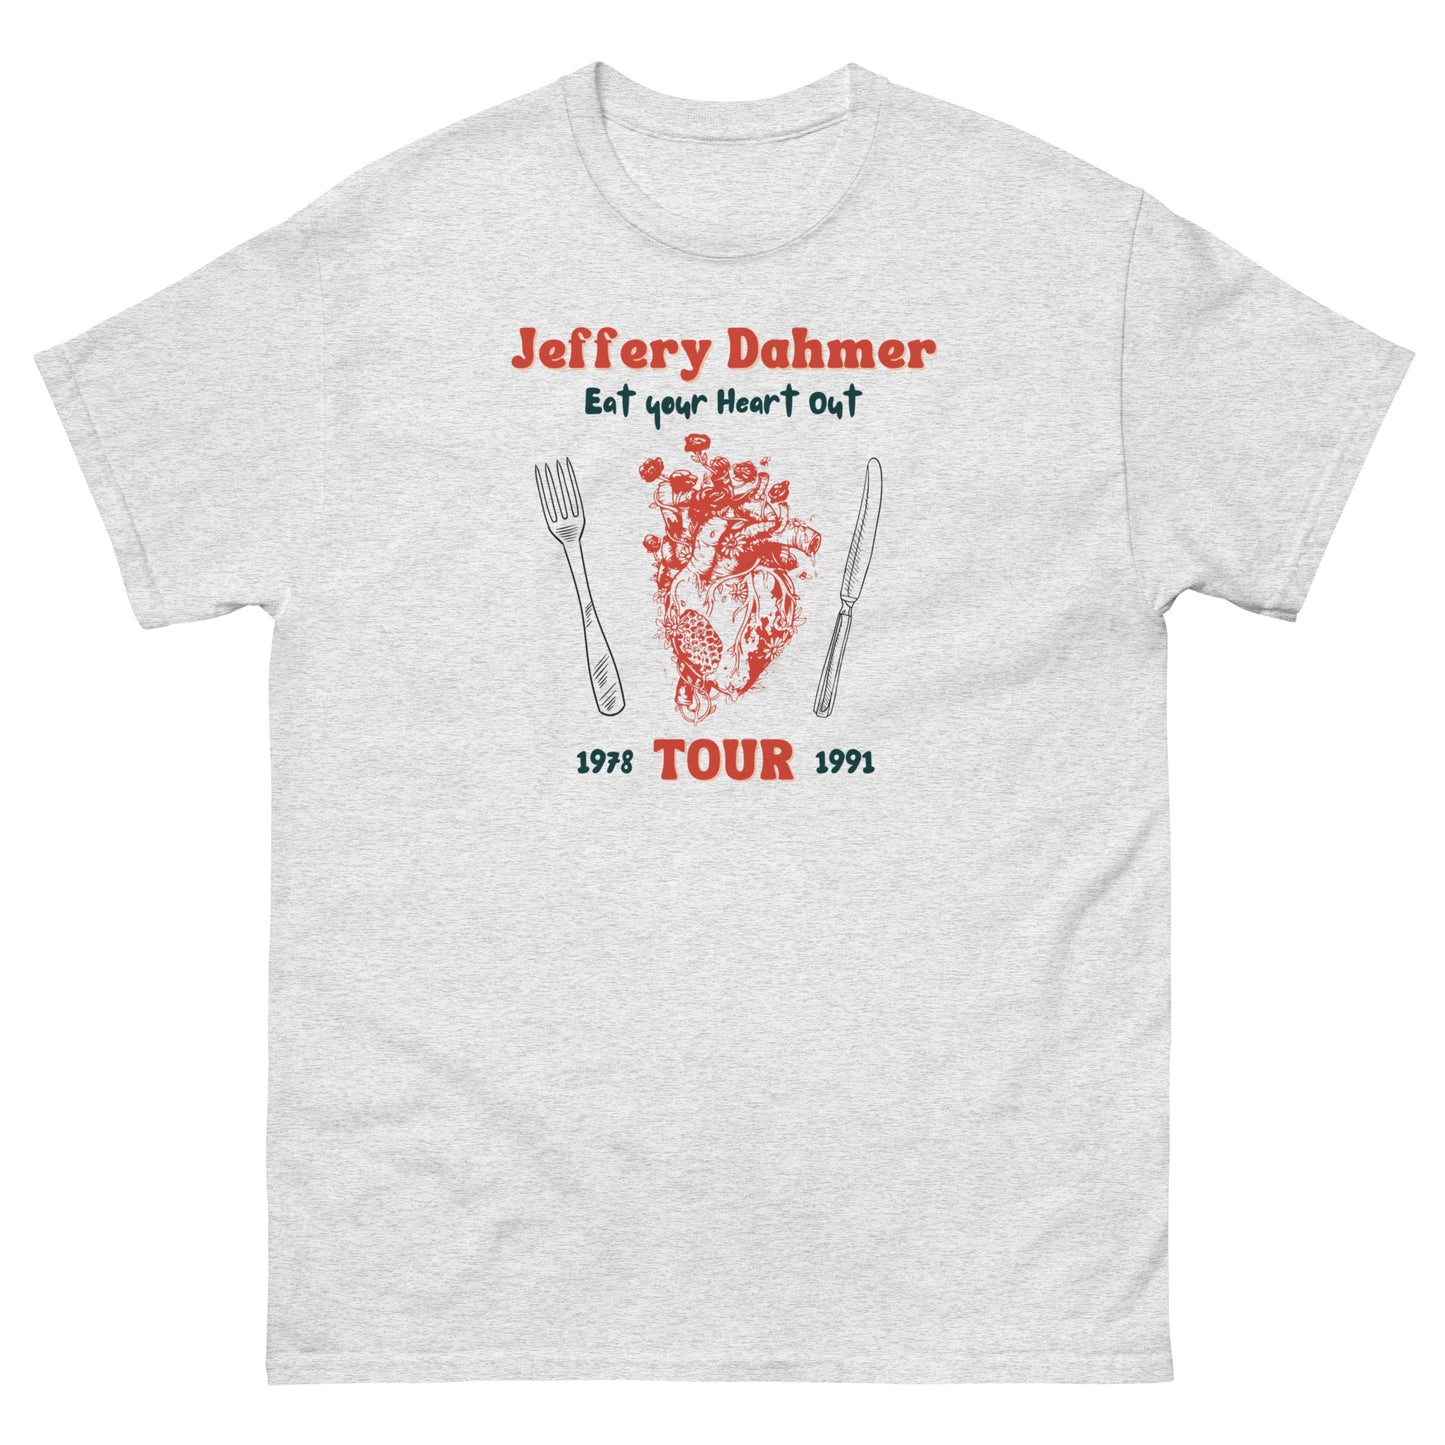 Eat your Heart out tour Men's classic tee